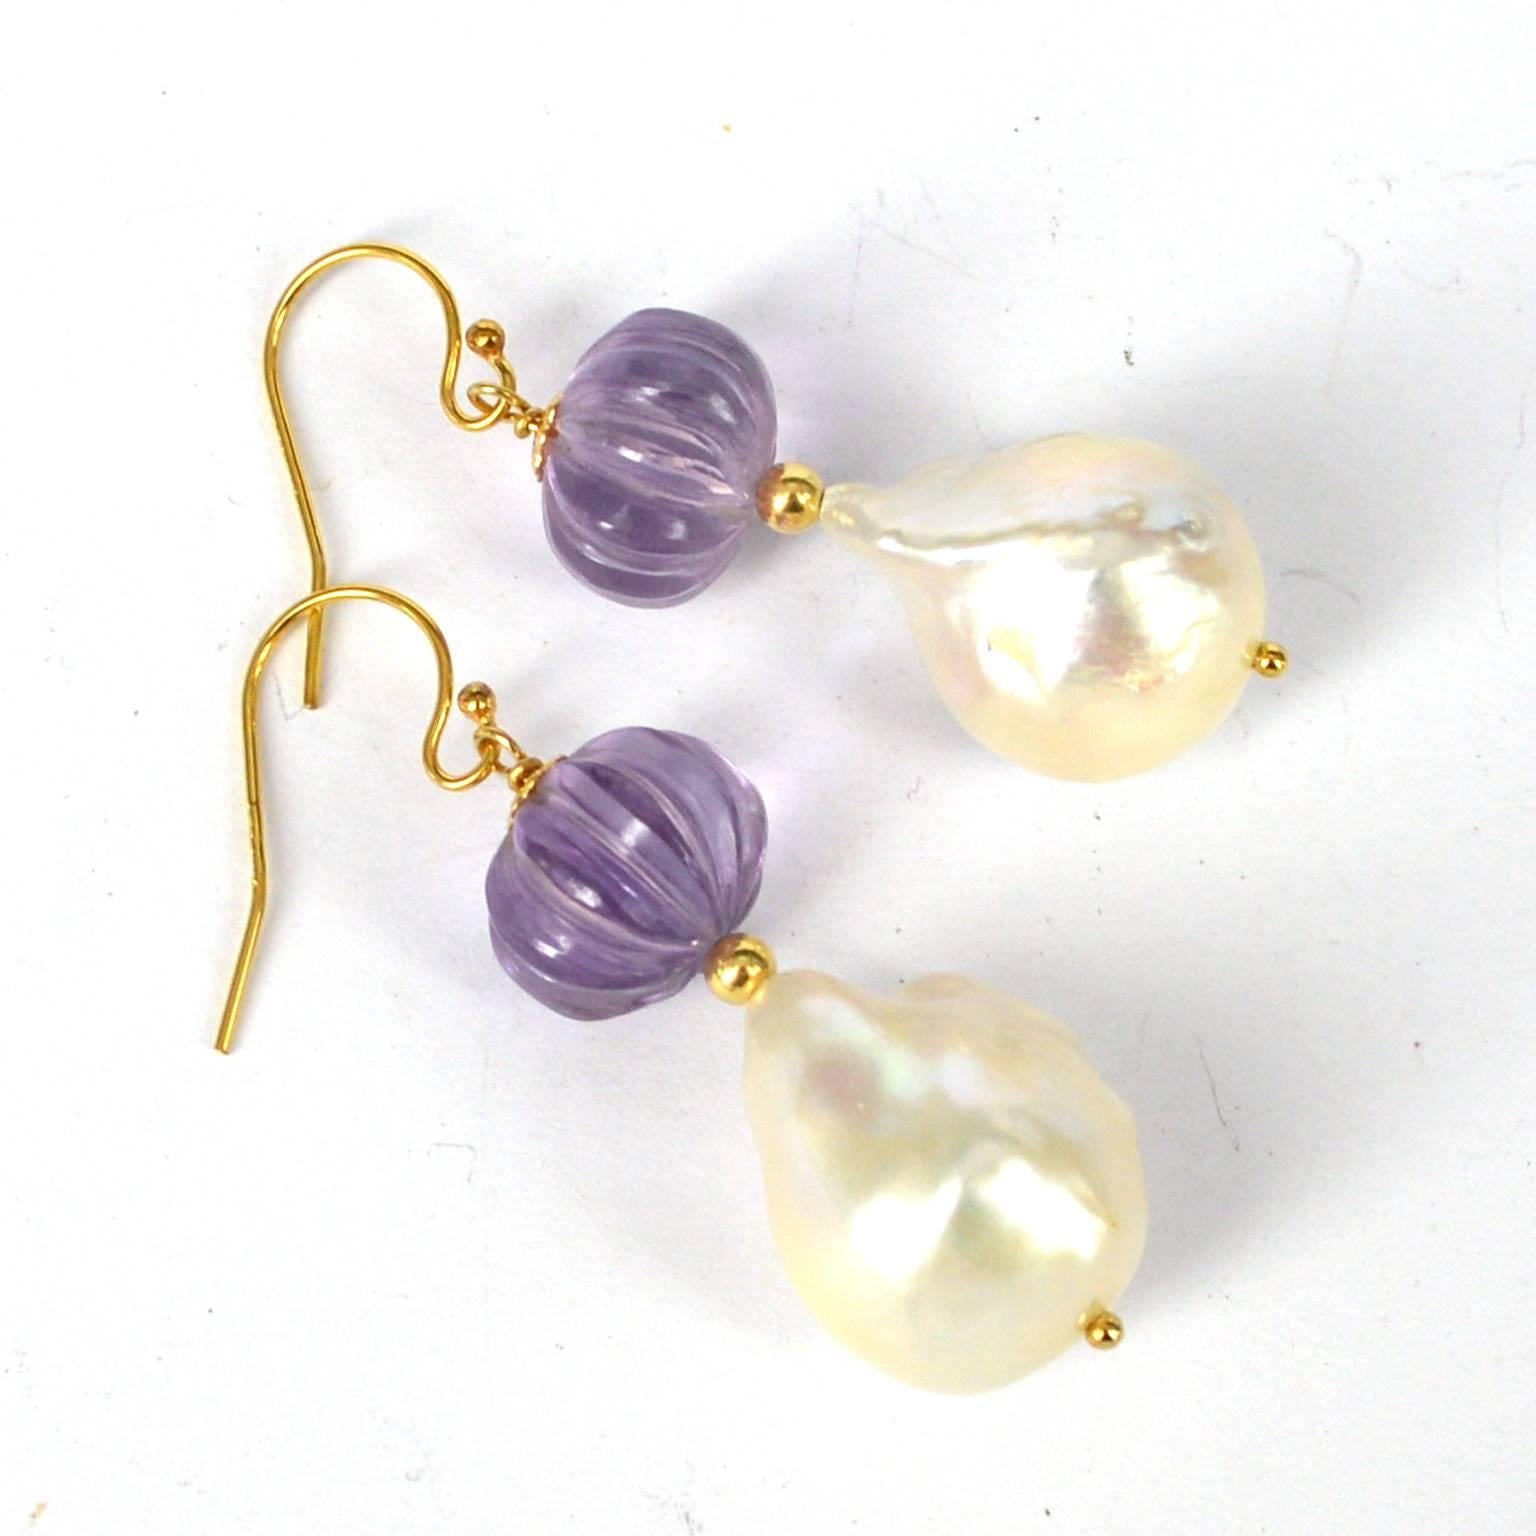 Stunning hand carved melon Shaped Amethyst with a high Quality Baroque Fresh Water Pearl.
Amethyst Beads measure 10x9mm with a 14x18mm Pearl.
All findings are 14k Gold Filled
length of Earrings is 45mm

